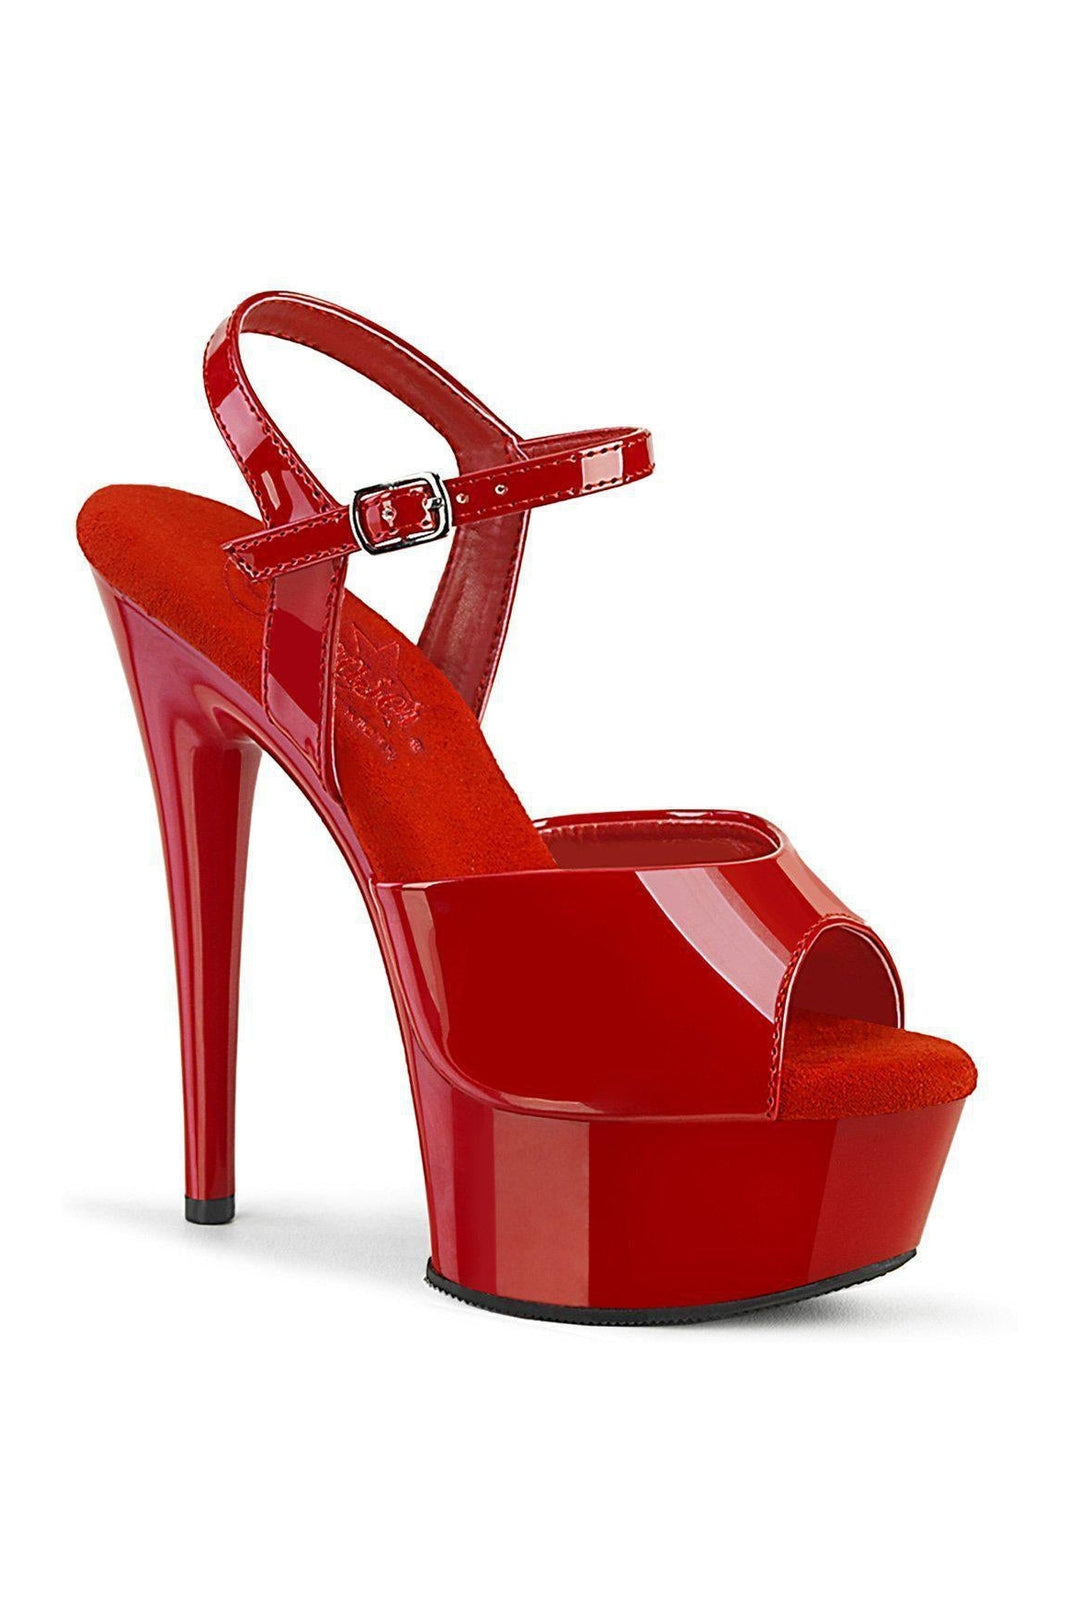 EXCITE-609 Sandal | Red Patent-Sandals-Pleaser-Red-7-Patent-SEXYSHOES.COM